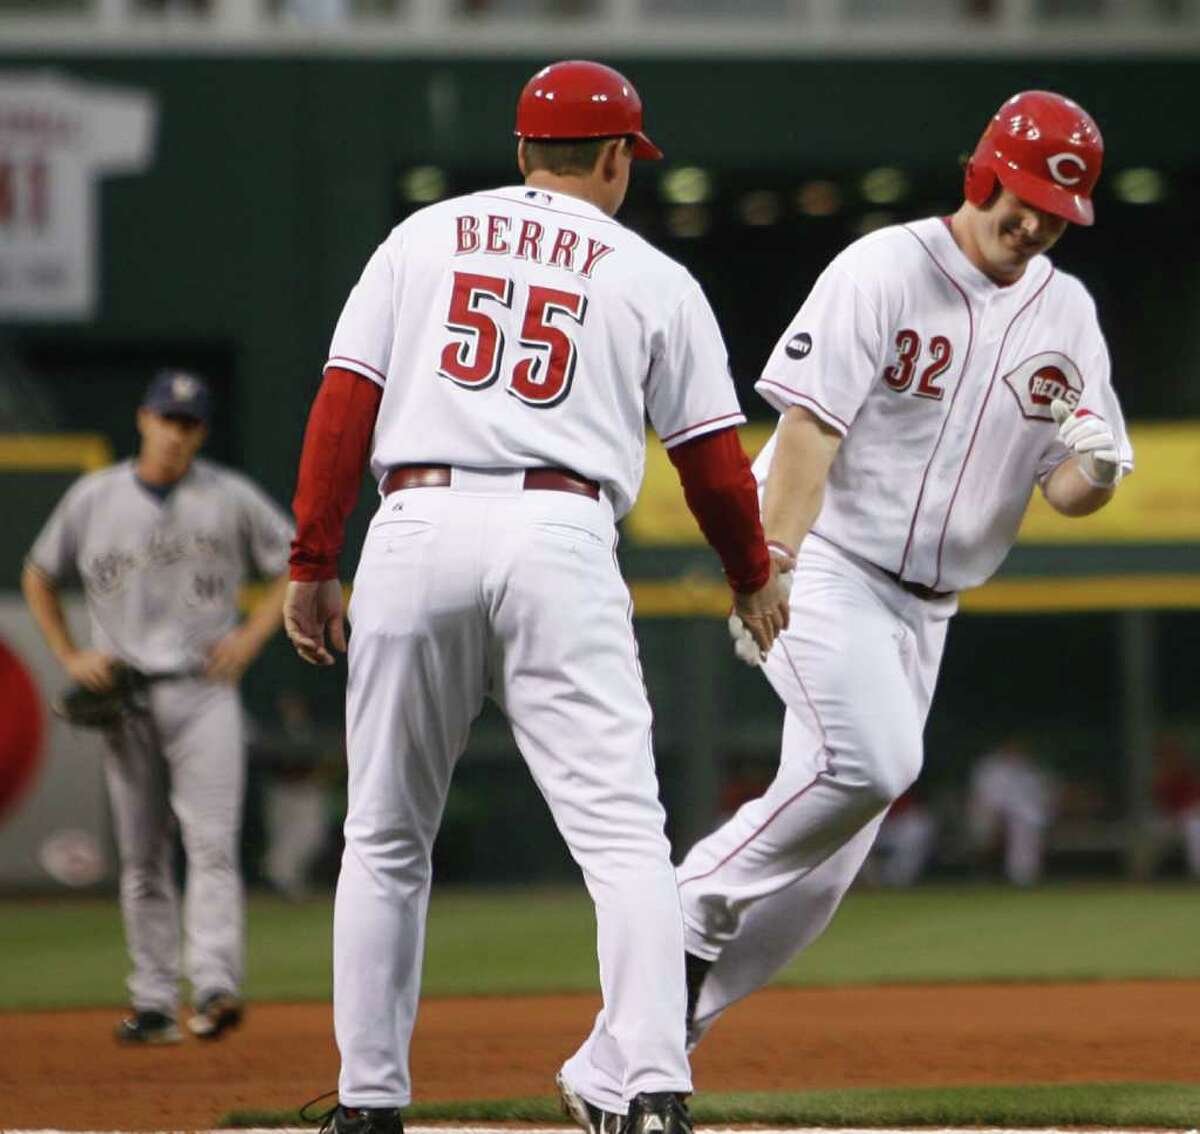 Cincinnati Reds' Jay Bruce (32) is congratulated by third base coach Mark Berry (55) after Bruce hit a two-run home run off Milwaukee Brewers pitcher Jeff Suppan in the first inning during a baseball game, Friday, Sept. 19, 2008, in Cincinnati. (AP Photo/David Kohl)